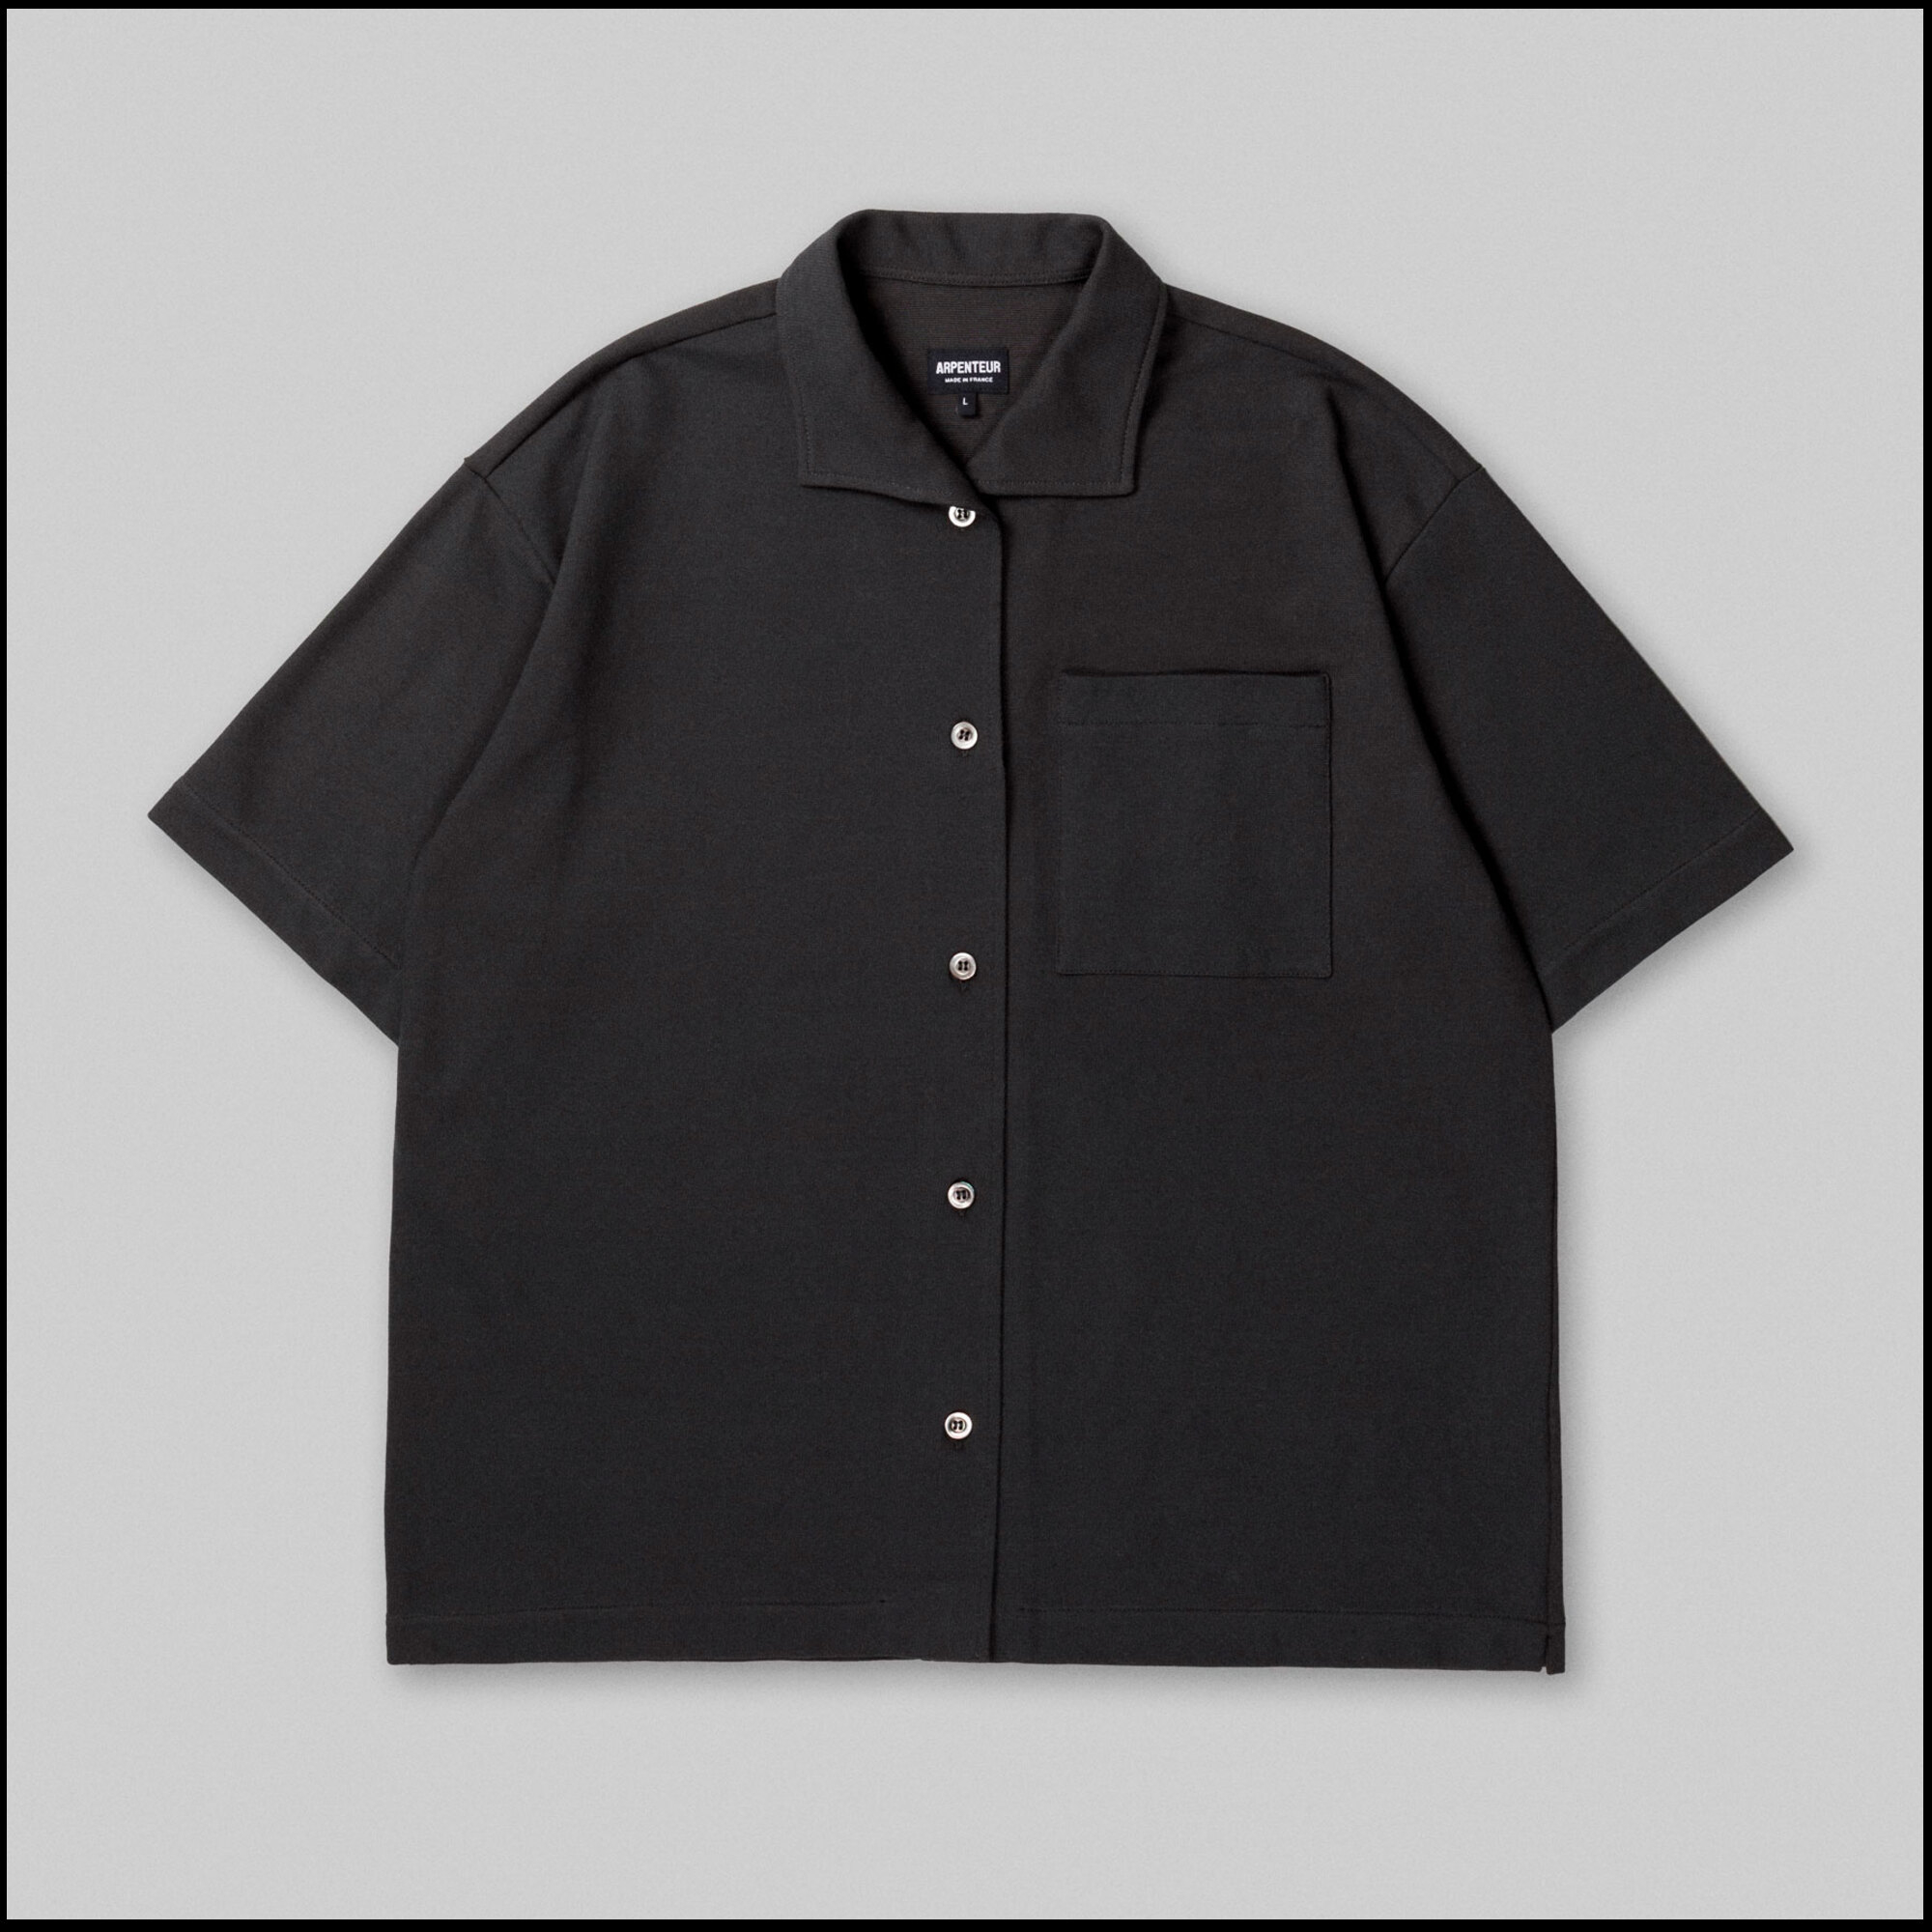 CORAL short sleeve shirt by Arpenteur in Charcoal color